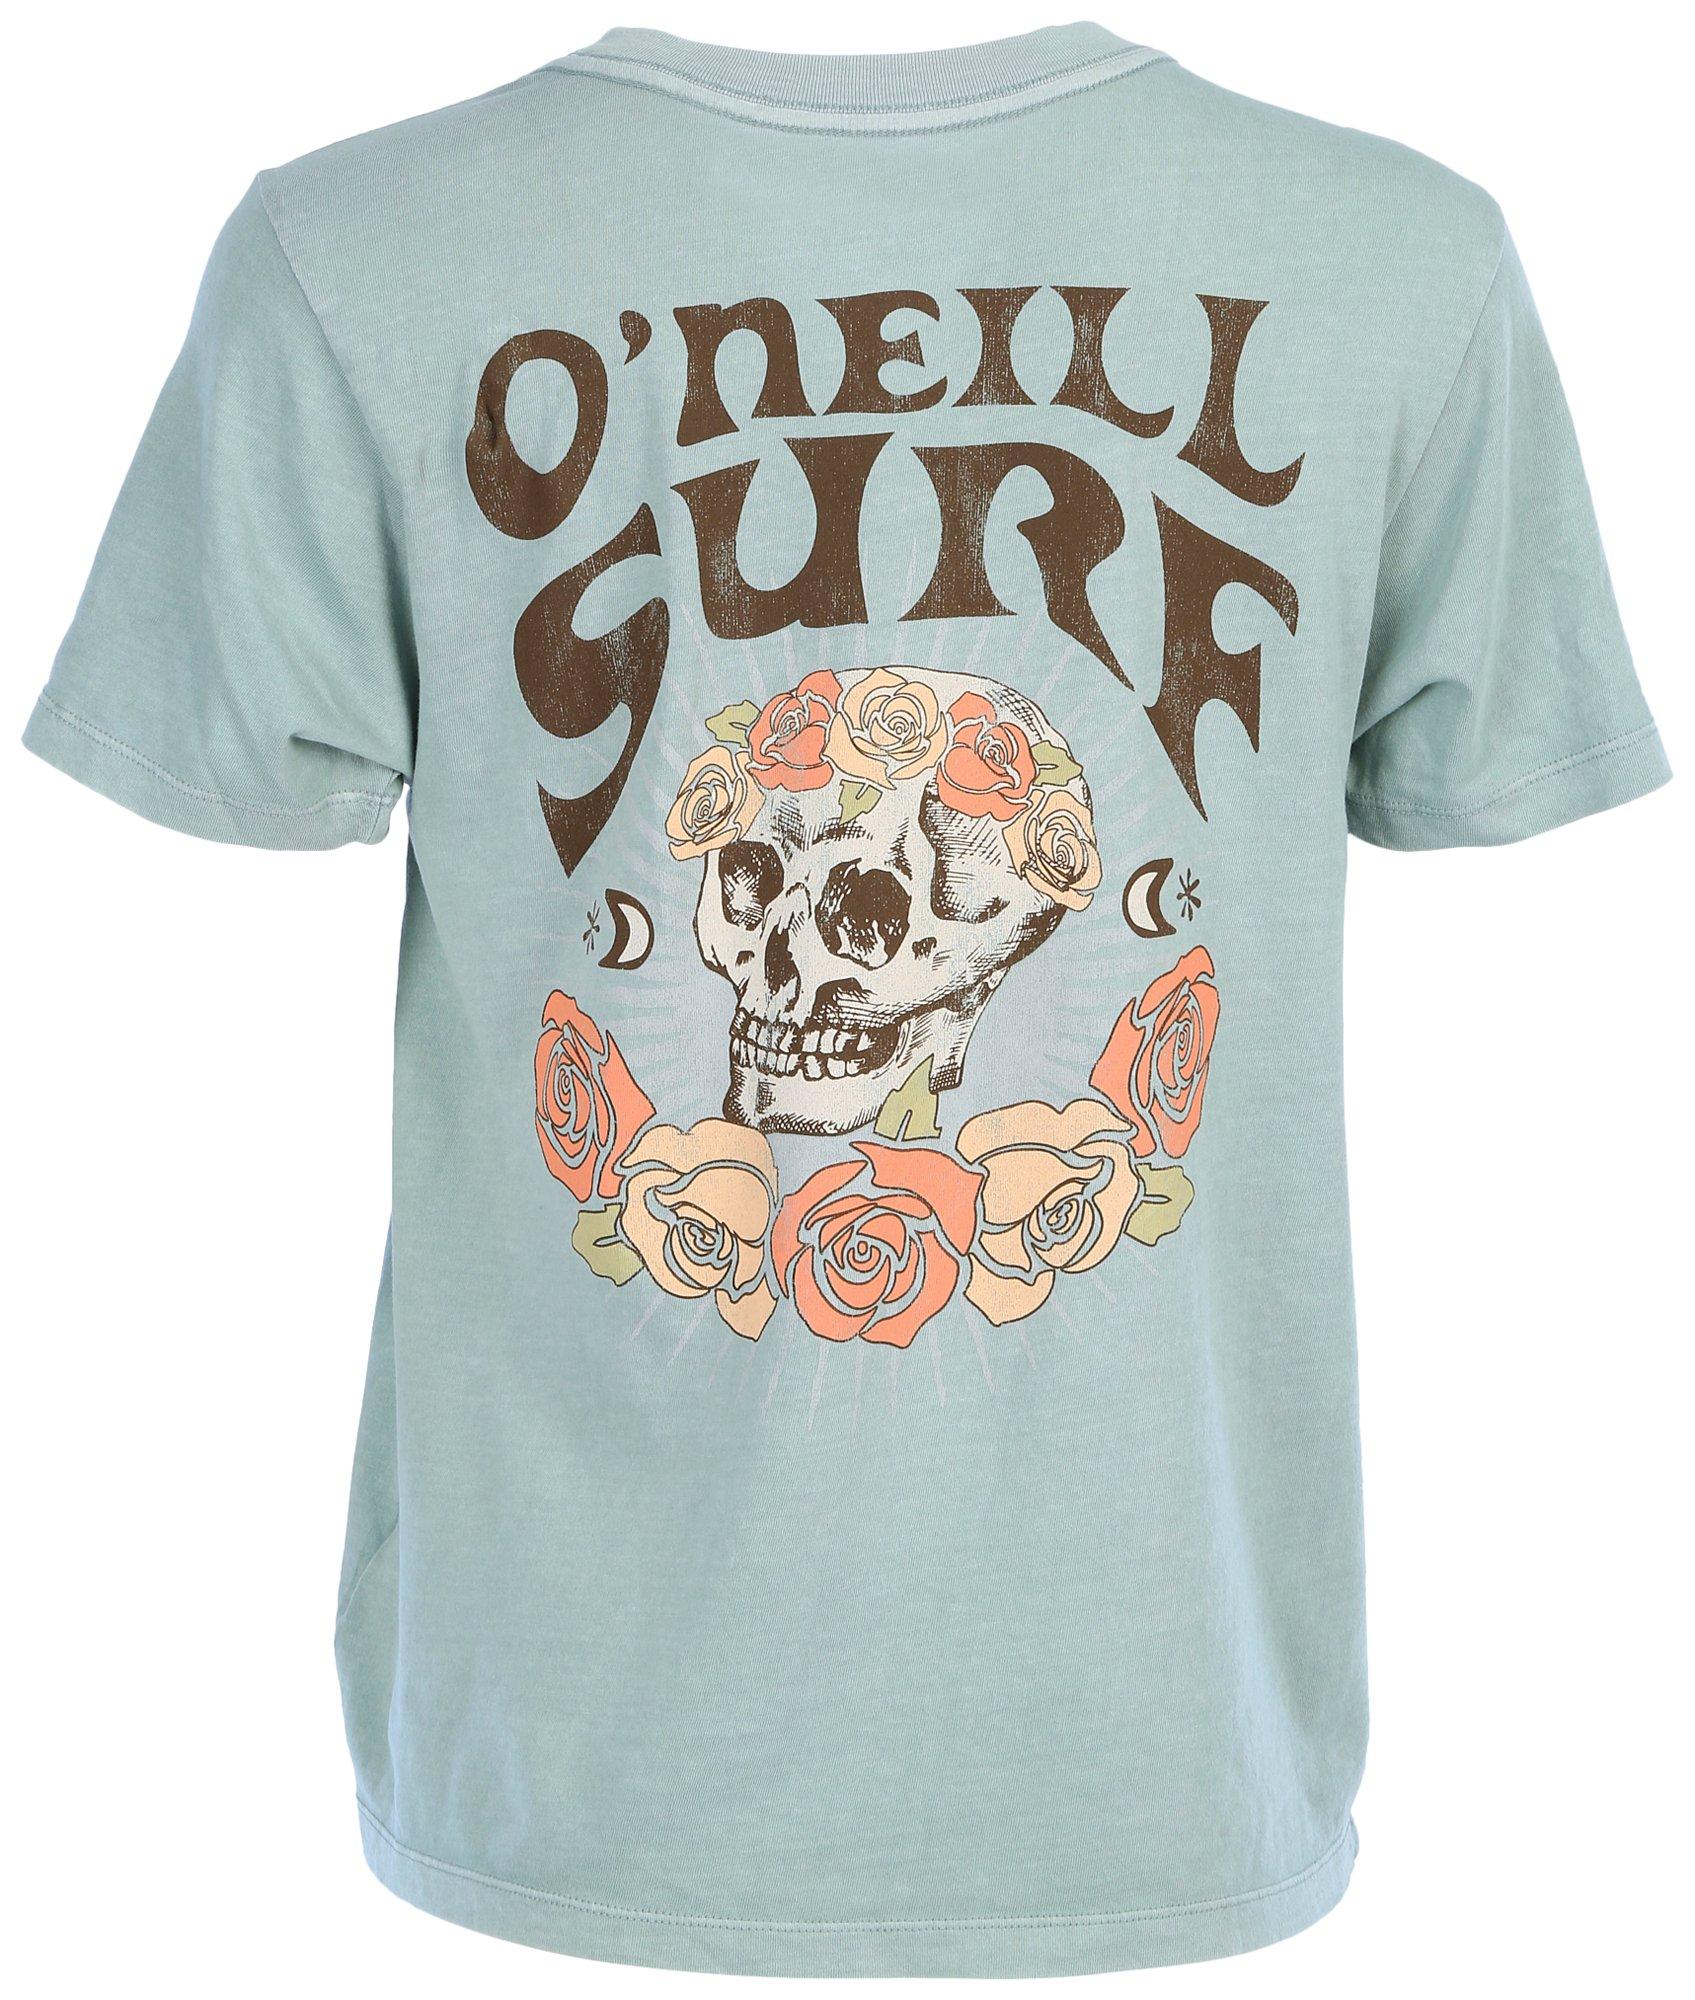 O'Neill Juniors Surf Cropped Graphic Tee